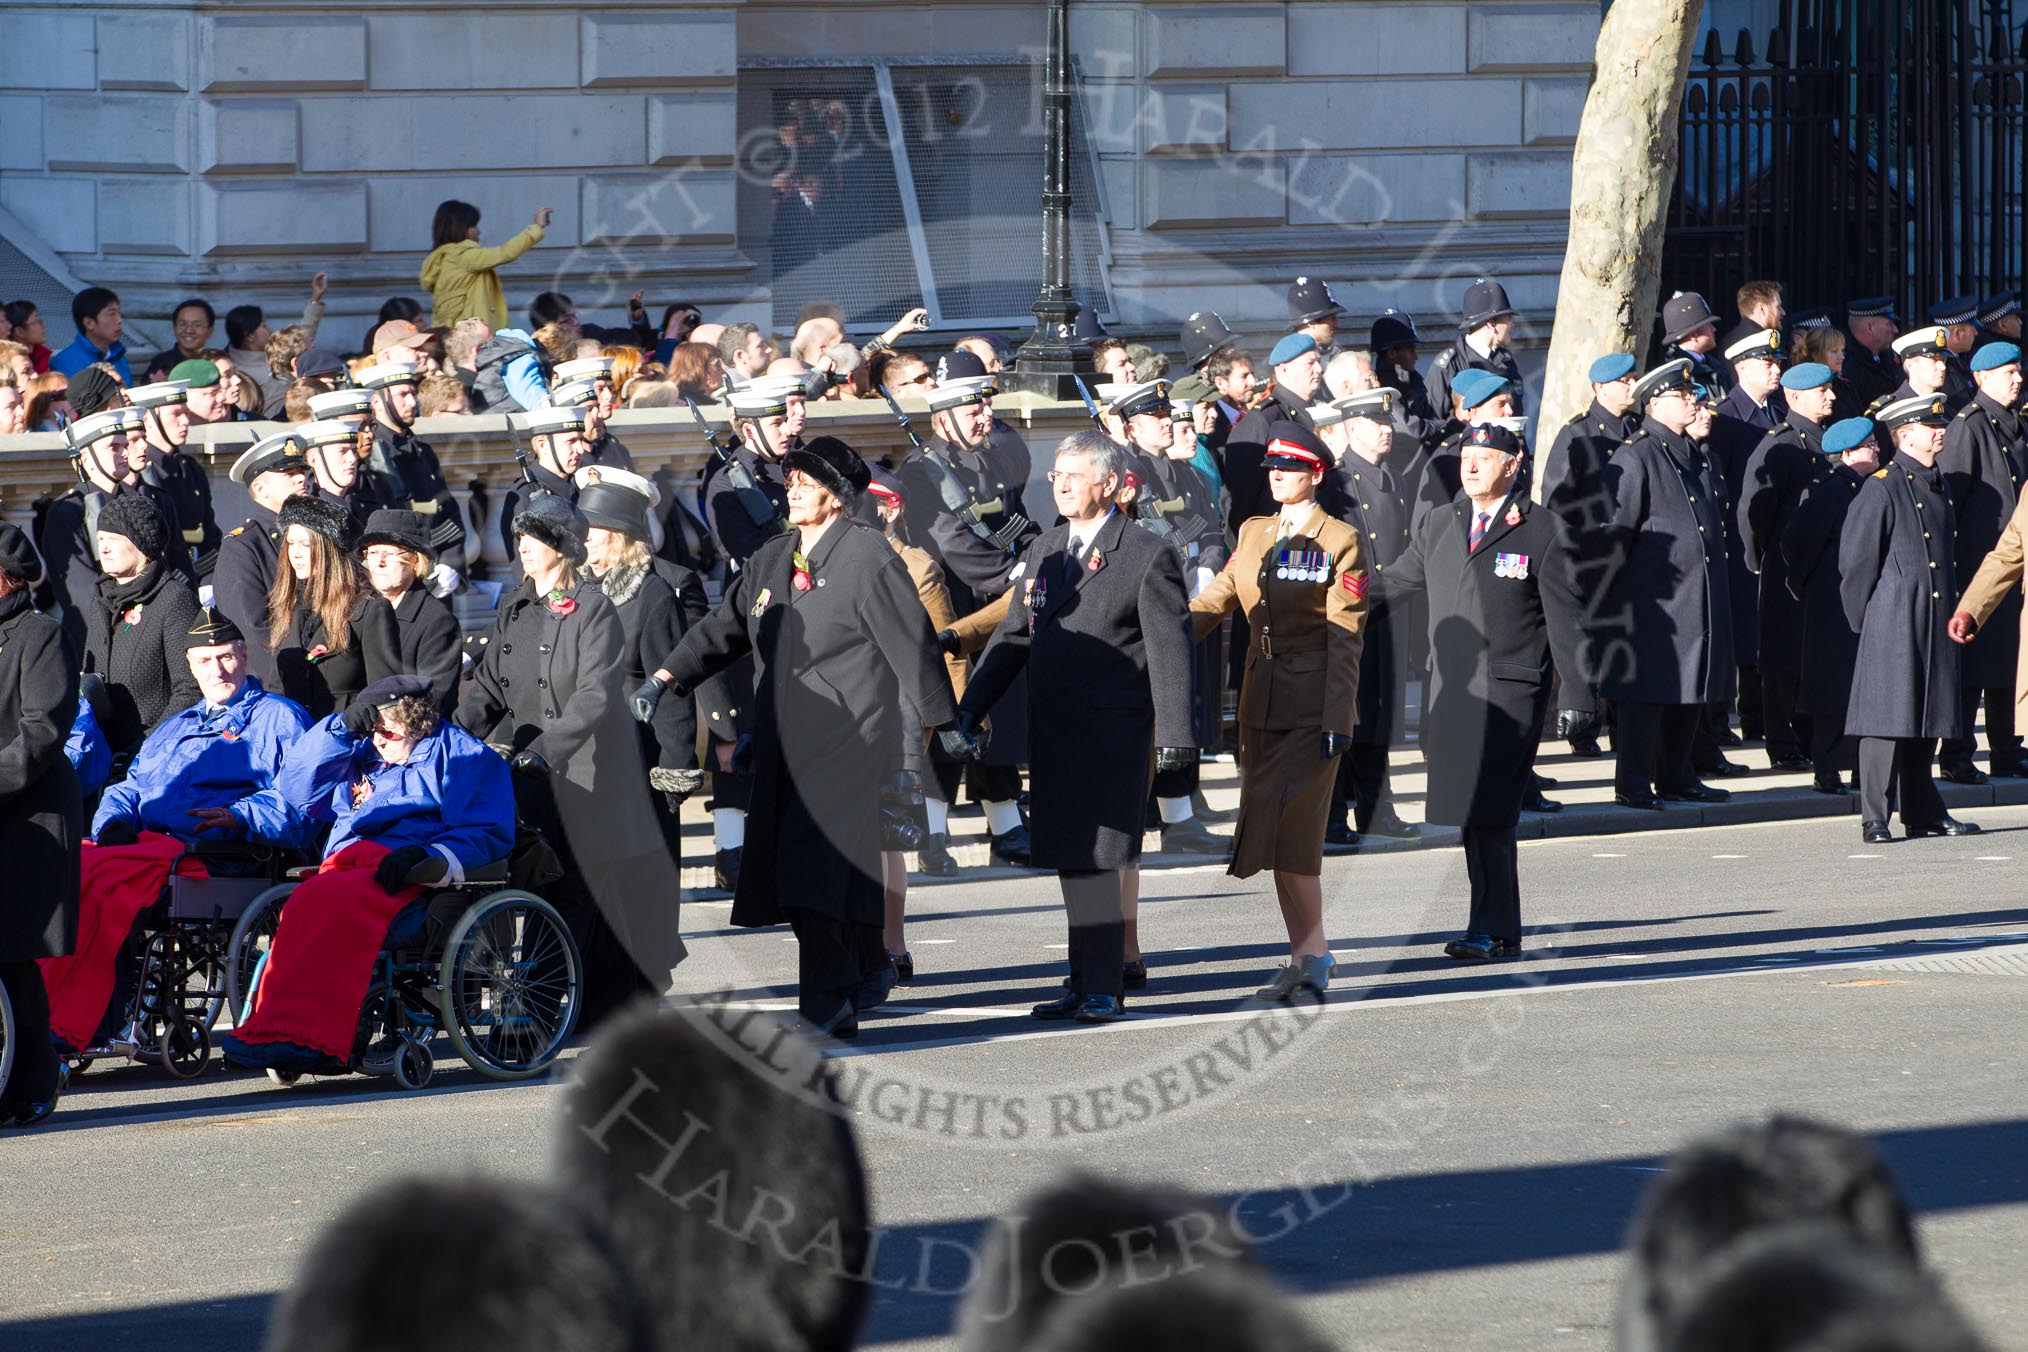 Remembrance Sunday 2012 Cenotaph March Past: Group E44 - Queen Alexandra's Hospital Home for Disabled Ex-Servicemen & Women..
Whitehall, Cenotaph,
London SW1,

United Kingdom,
on 11 November 2012 at 11:44, image #357